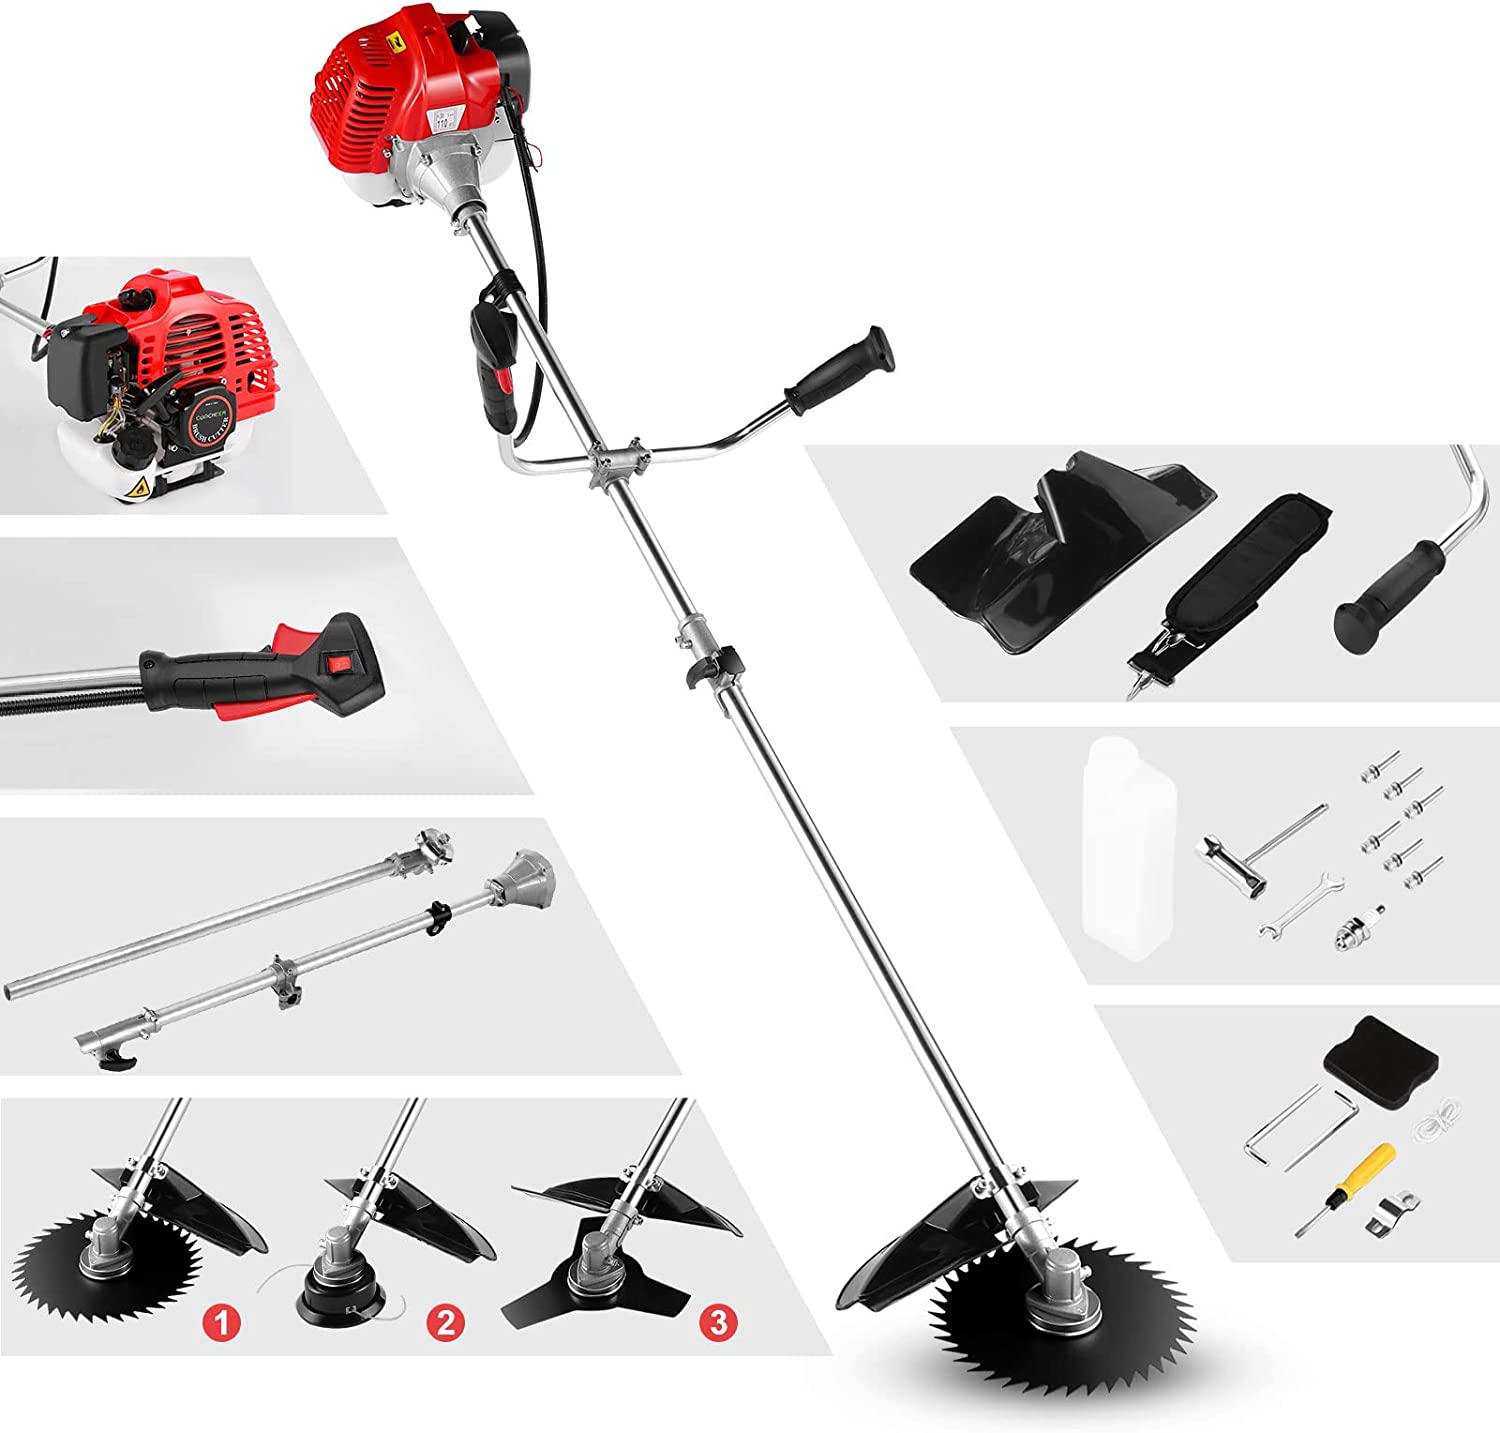 COOCHEER 58cc Weed Eater, 2-Cycle Cordless Gas Powered [...]